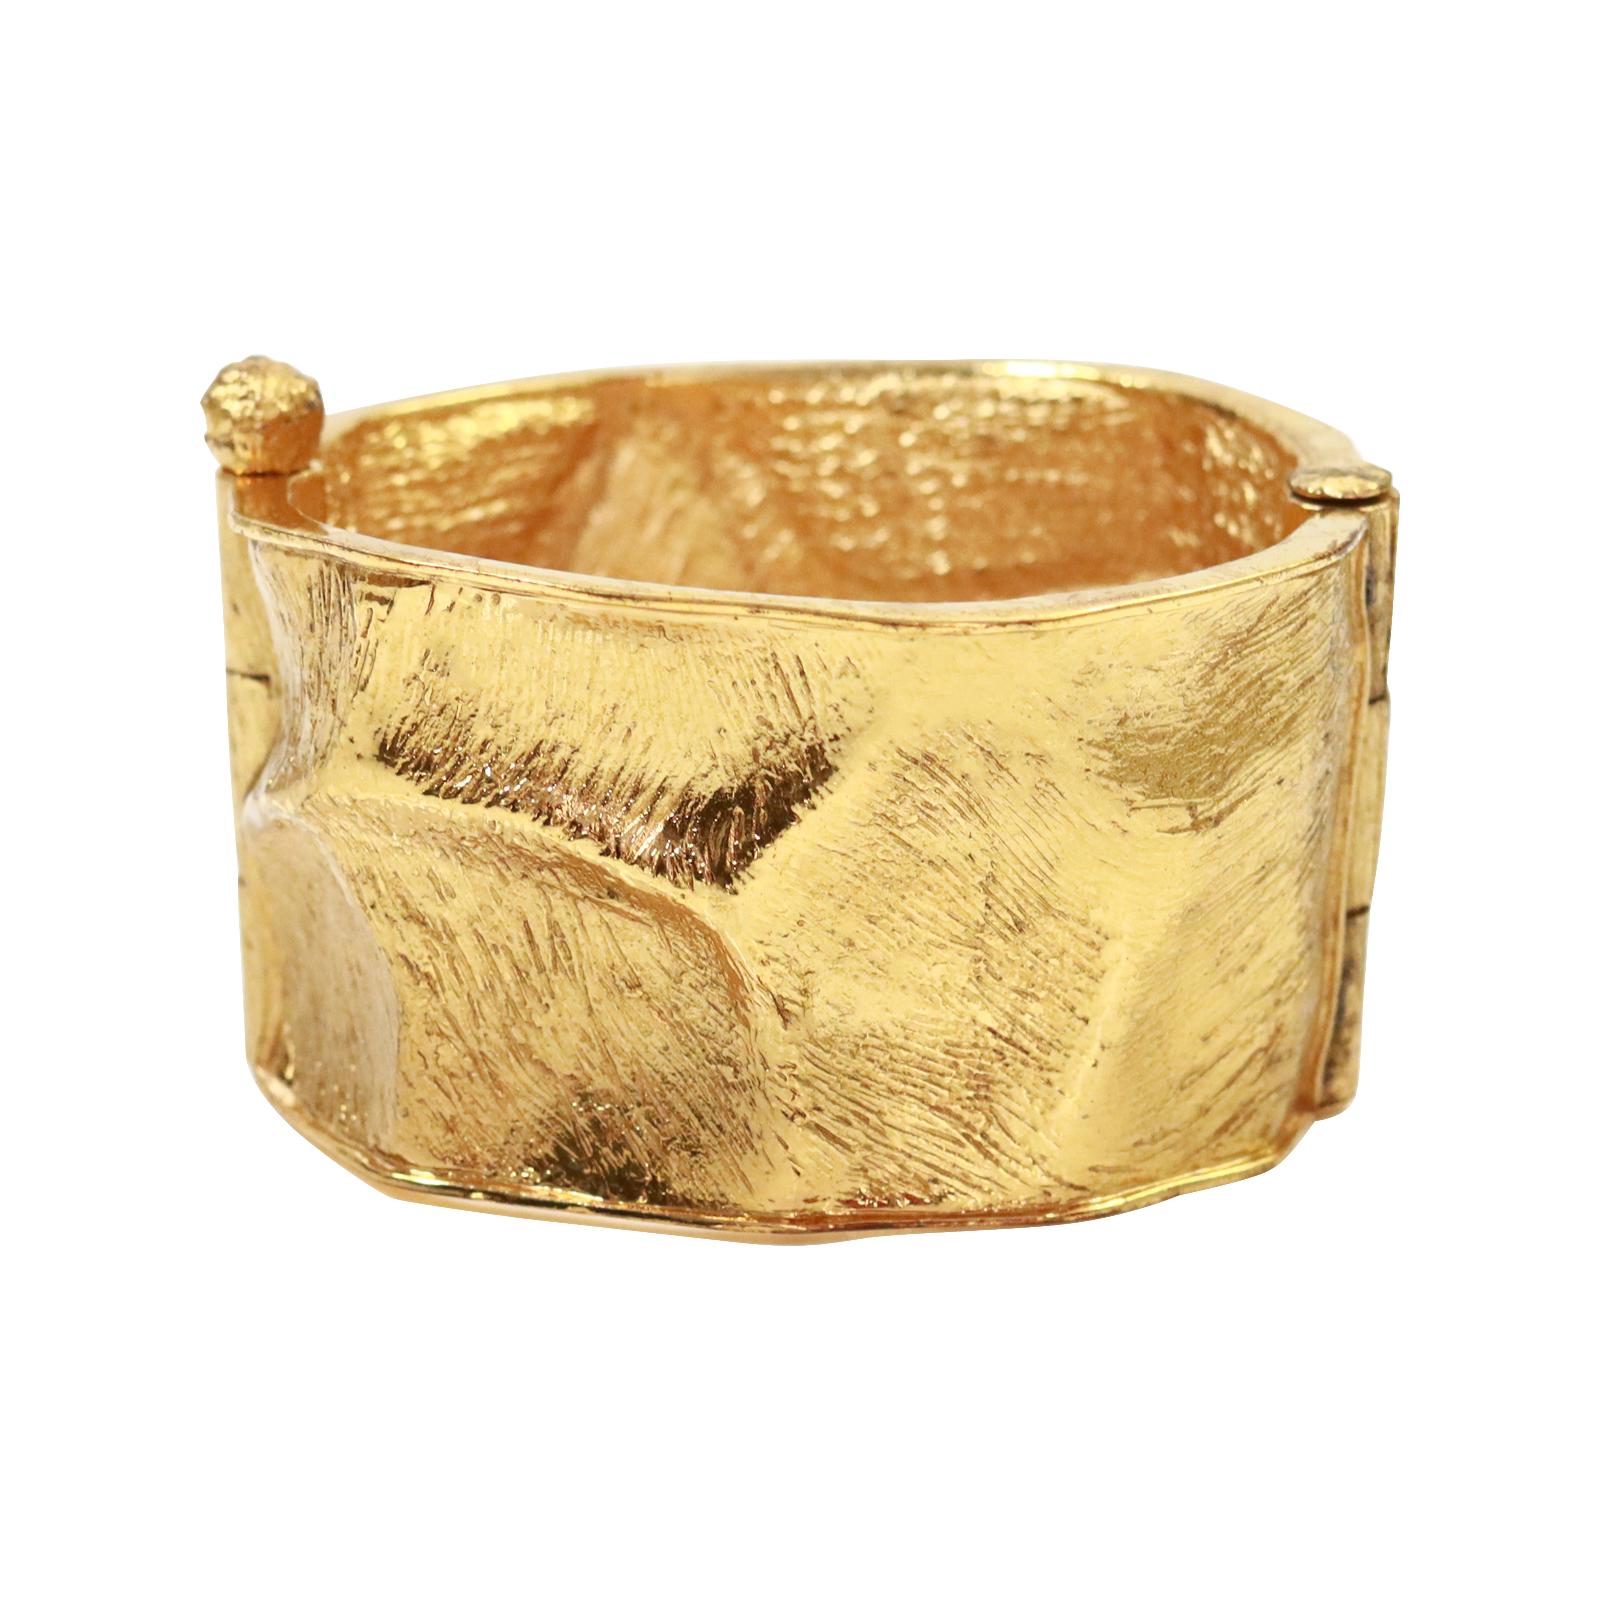 Vintage Yves Saint Laurent YSL Gold Tone Cuff Bracelet Circa 1990s. Classic cuff bracelet with indentations all around. Smaller in the front part and getting larger in the back.  Has a great looking pin closure. Heavy and substantial.   Spectacular!